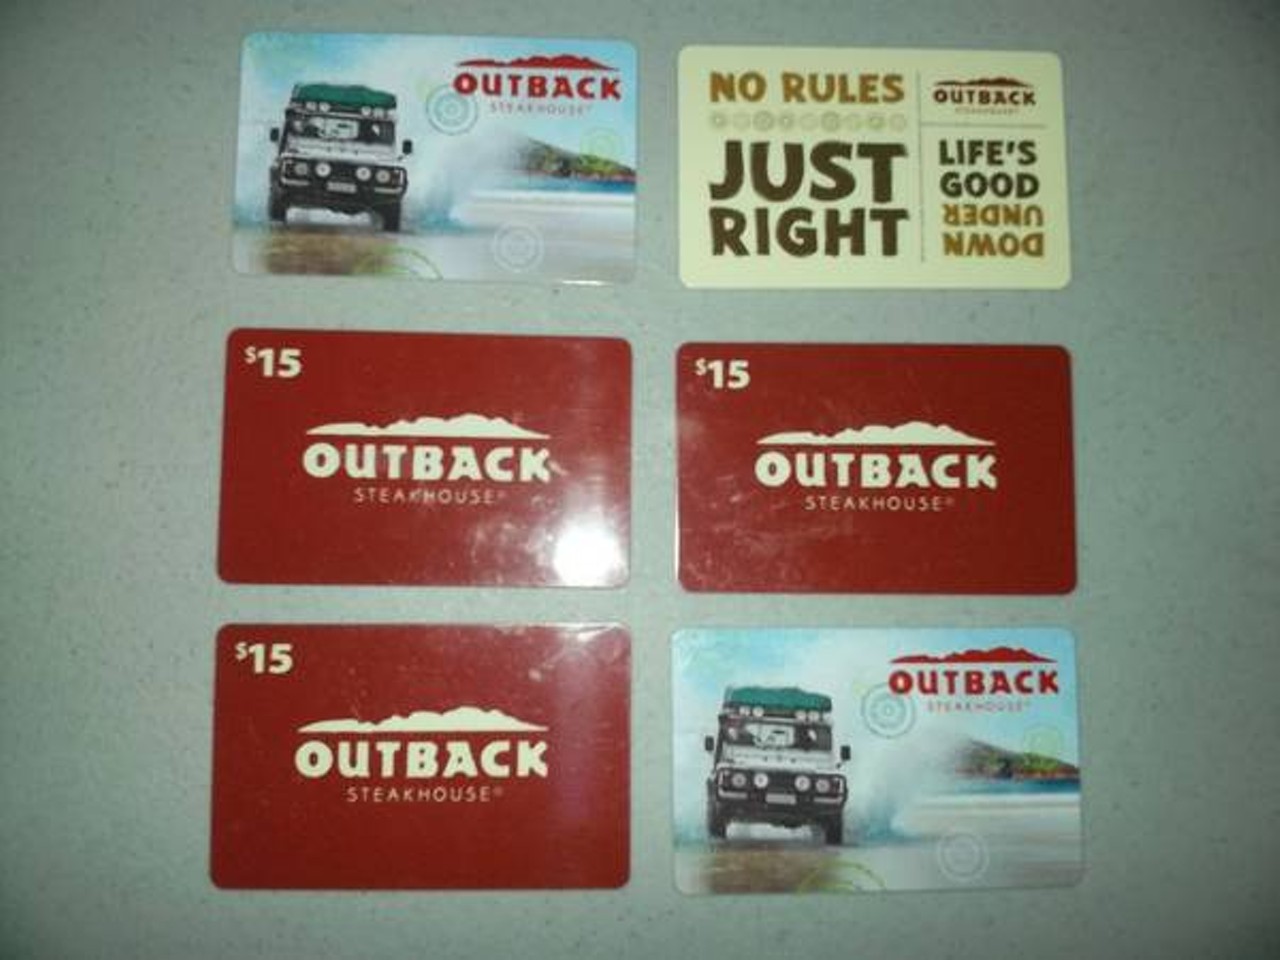 Outback Steakhouse Gift Cards
Just imagine how much steak you will be consuming when you purchase $160 worth of Outback Steakhouse gift cards. We&#146;re not sure how someone collected that many gift cards from Outback, but we&#146;re not mad about it.